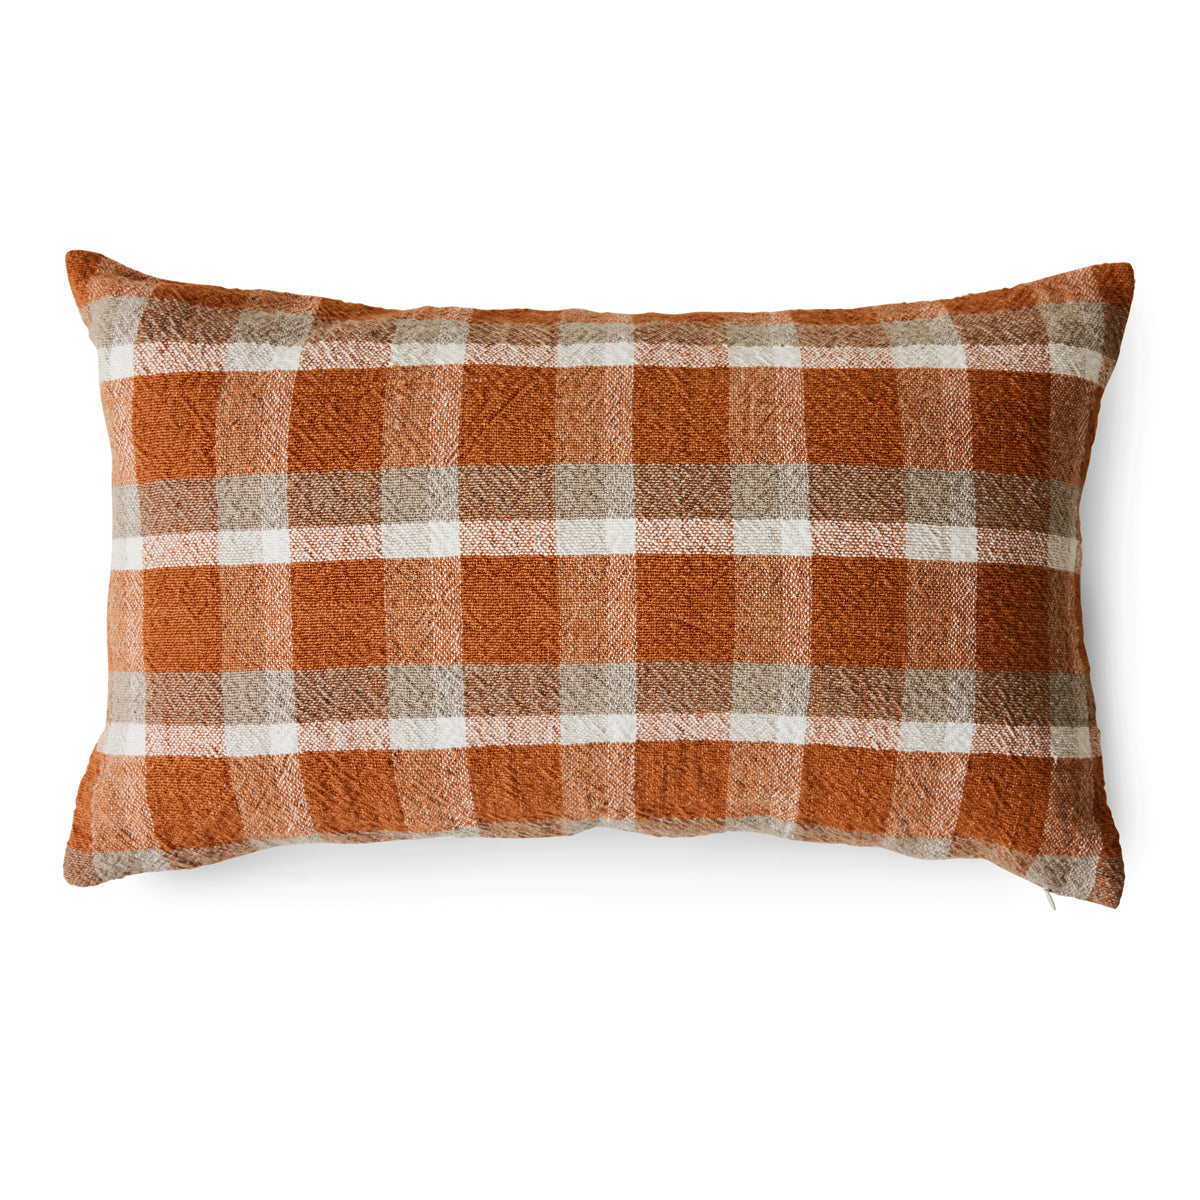 Woven Cushion Country 60 x 35